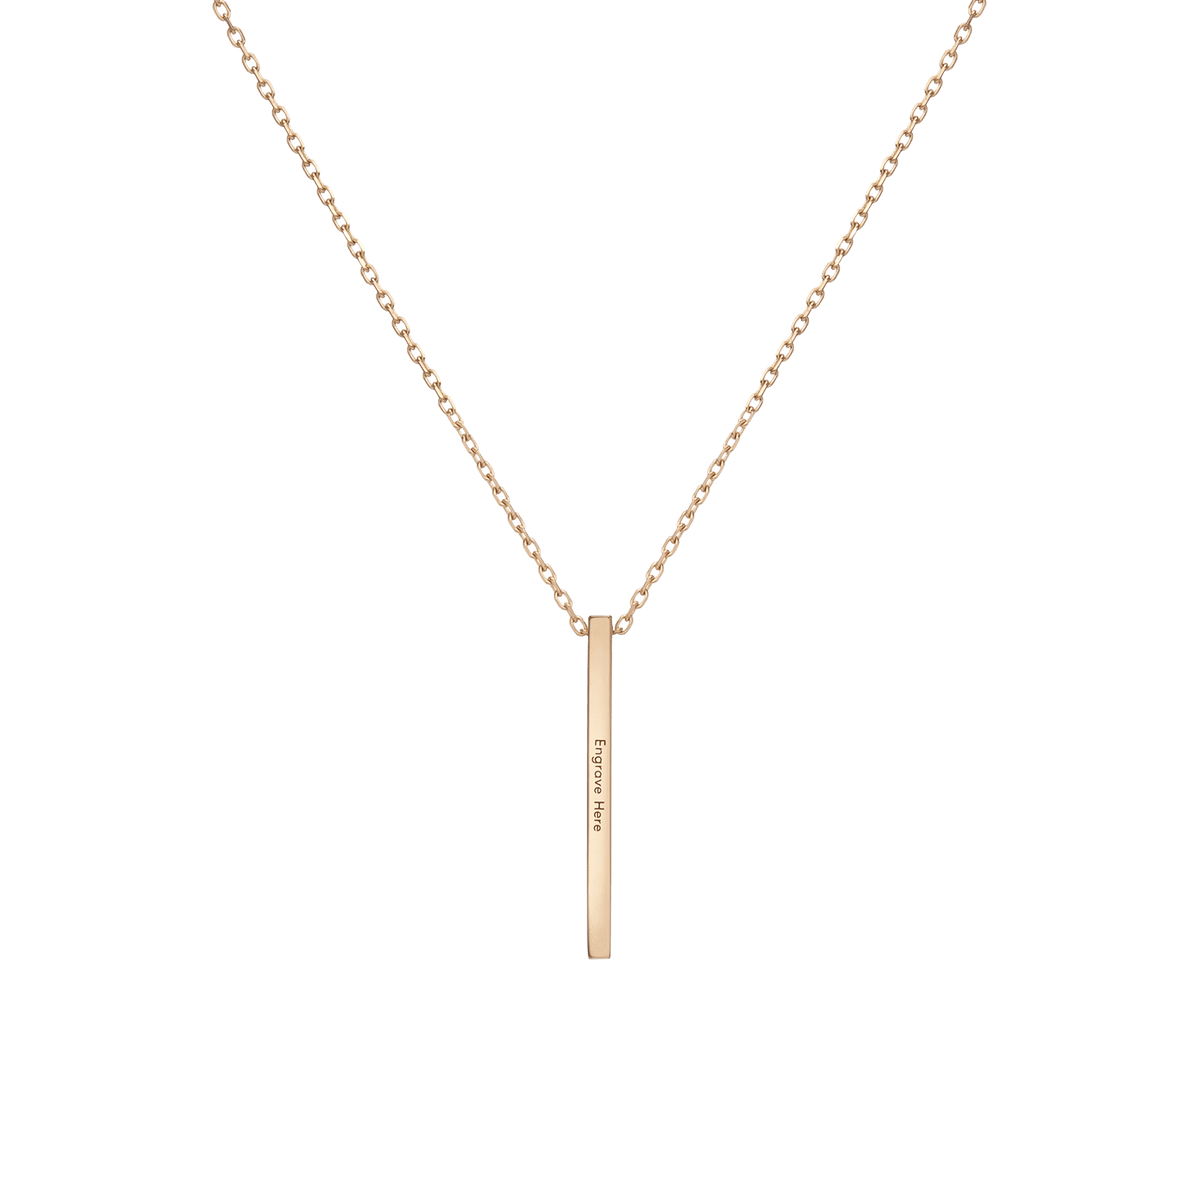 Short Gold Bar Drop Necklace in Yellow, Rose or White Gold